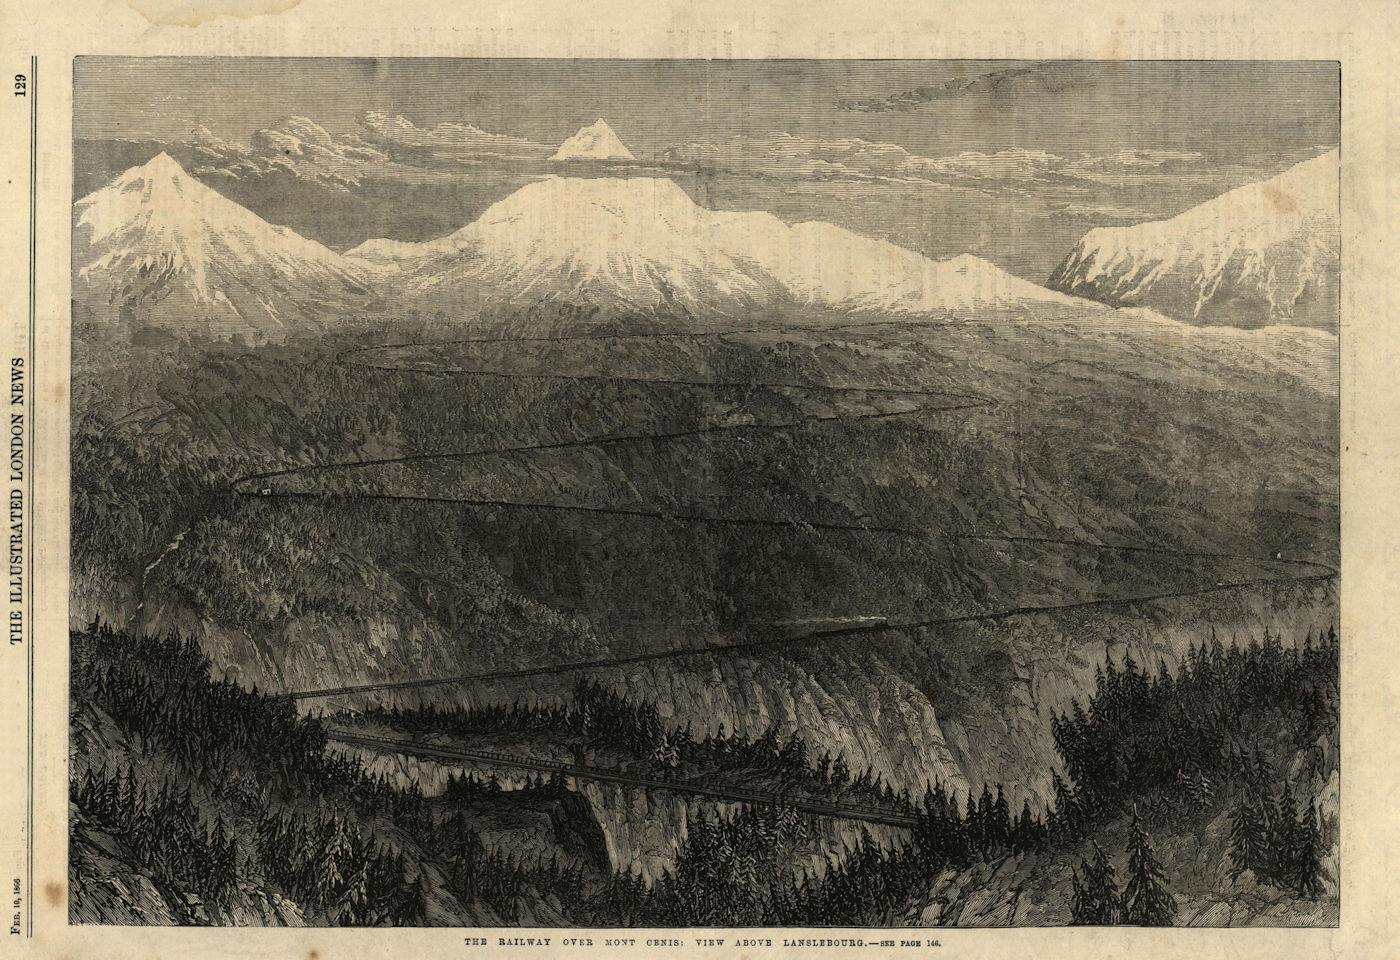 Associate Product The railway over Mont Cenis: View above Lanslebourg. Savoie 1866 old print